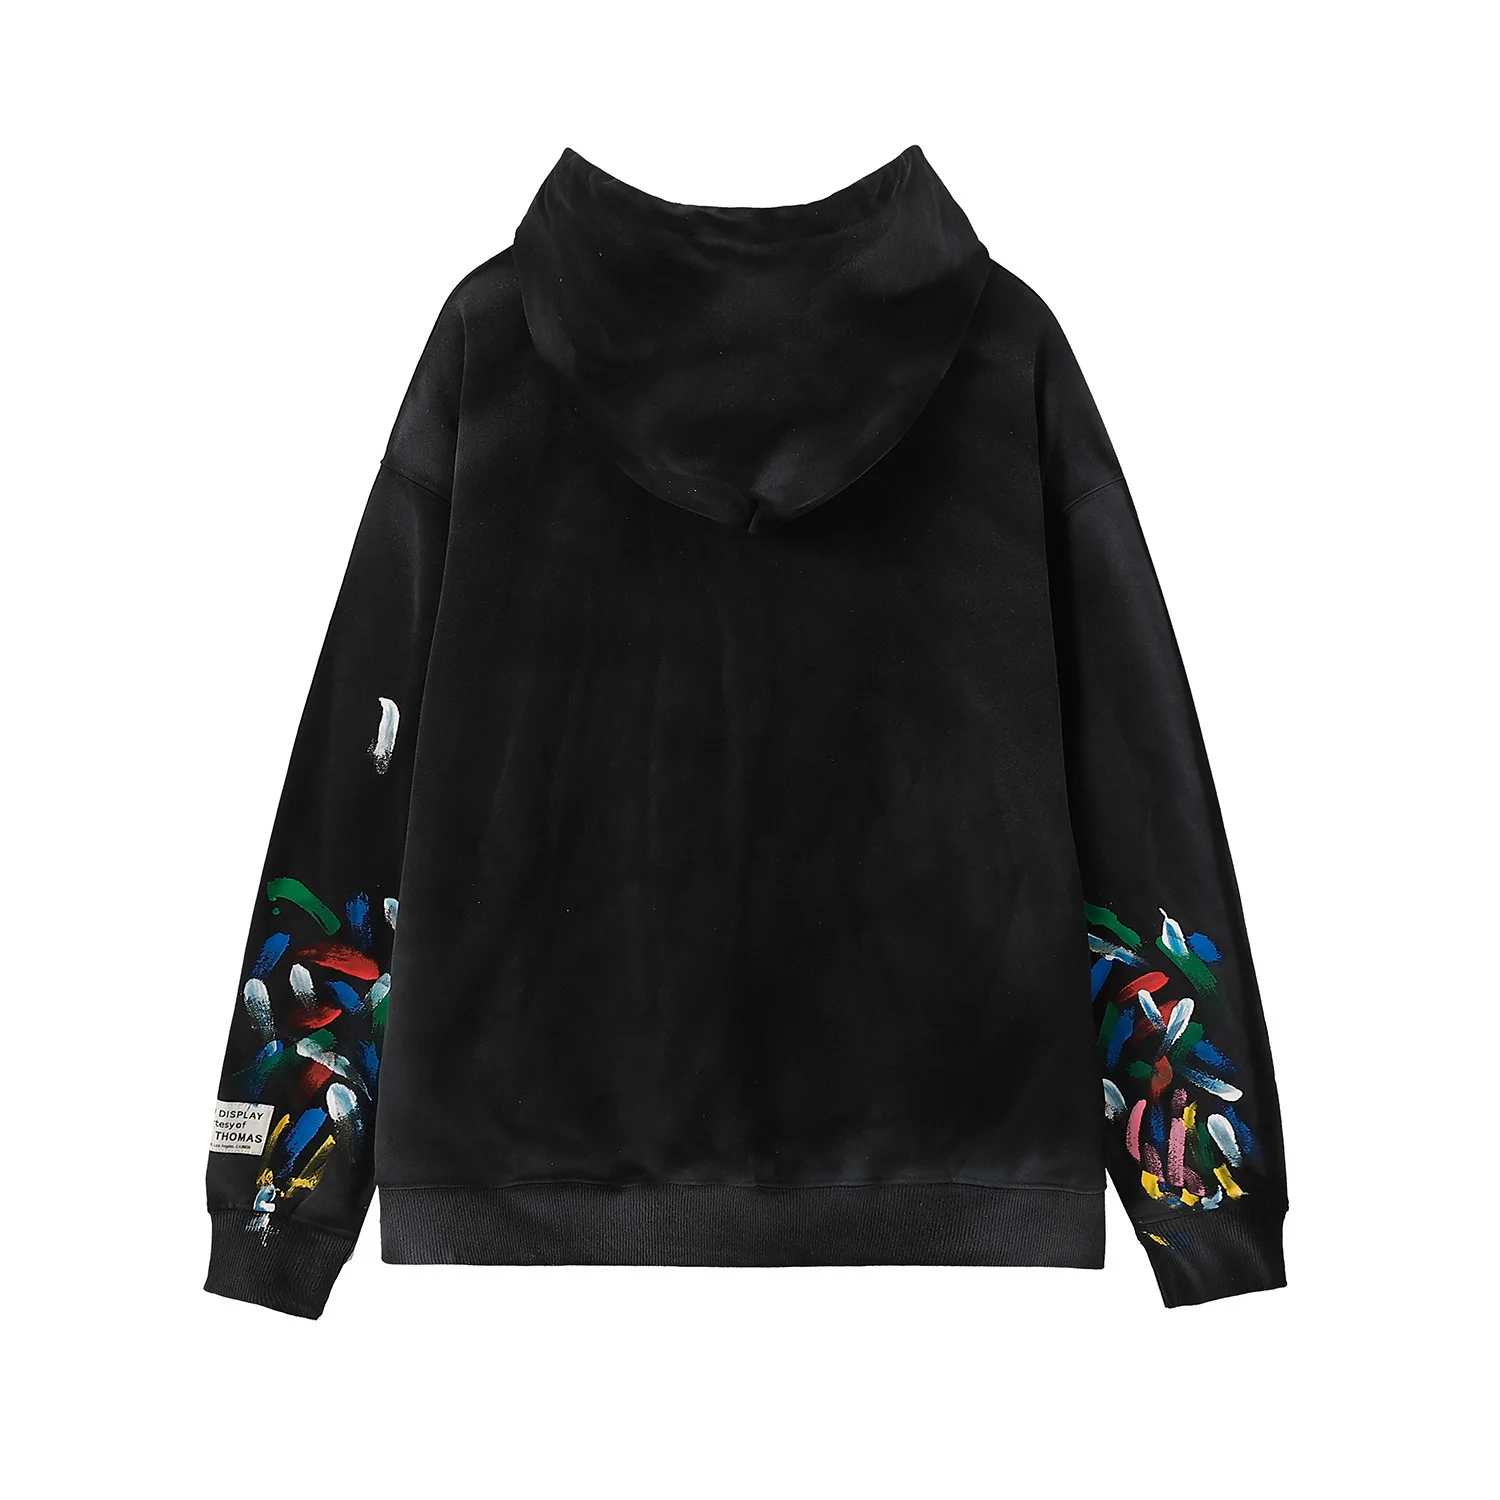 Gallery dept Fashion Sweatshirt Top Hand-painted Cotton Terry Hoodie 4